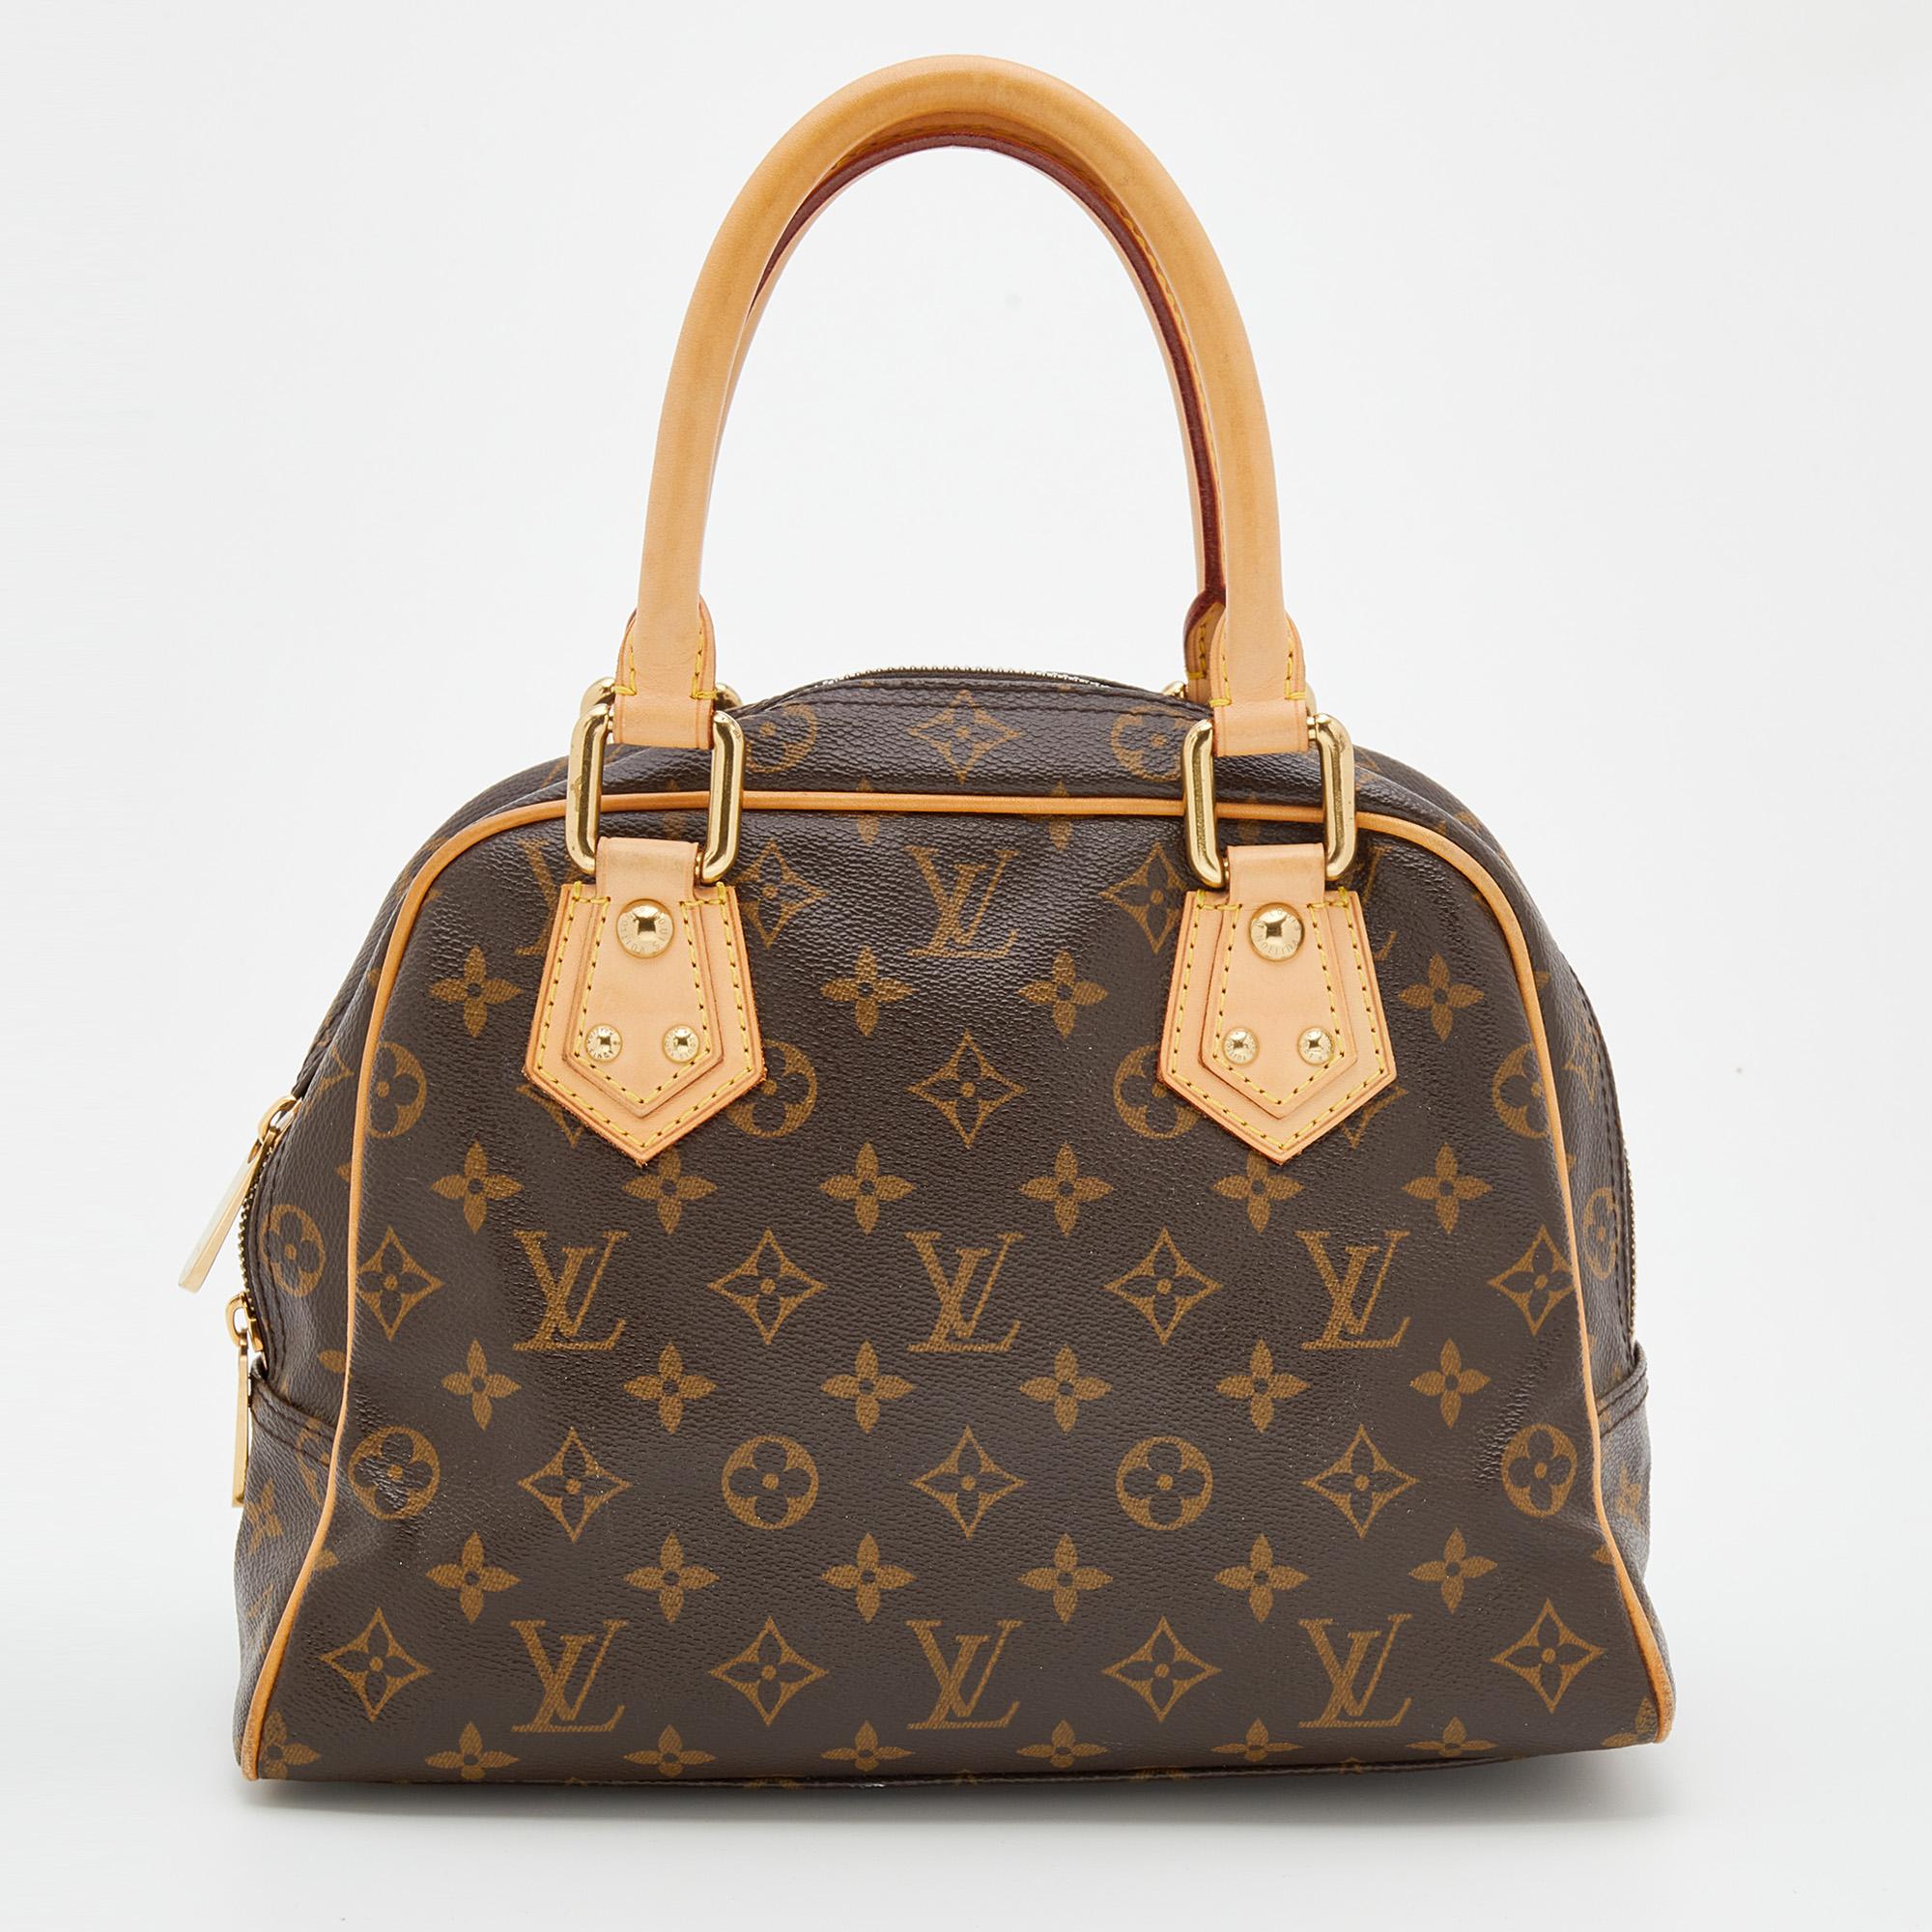 This Louis Vuitton bag is a must-have among all fashionistas! It is crafted from coated canvas and leather with beautiful gold-tone details and two cute front pockets. The zip closure opens into a neat spacious interior to carry your essentials with